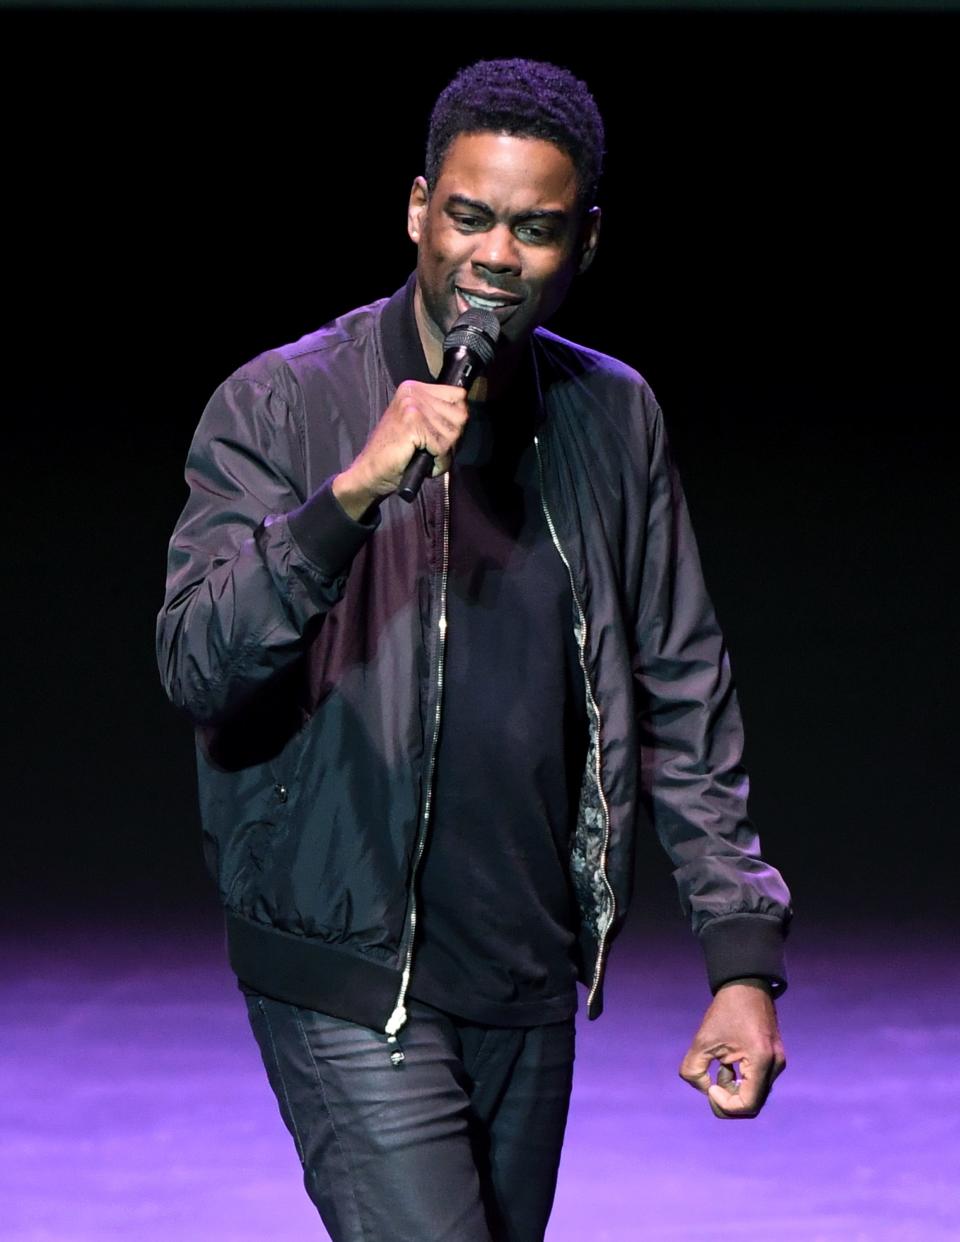 Chris Rock will perform at Fantasy Springs Resort Casino in Indio, Calif., on April 8, 2022. Tickets for his "Ego Death" comedy tour are selling out fast after Rock was on the receiving end of a slap on Sunday while hosting the Oscars by actor Will Smith.